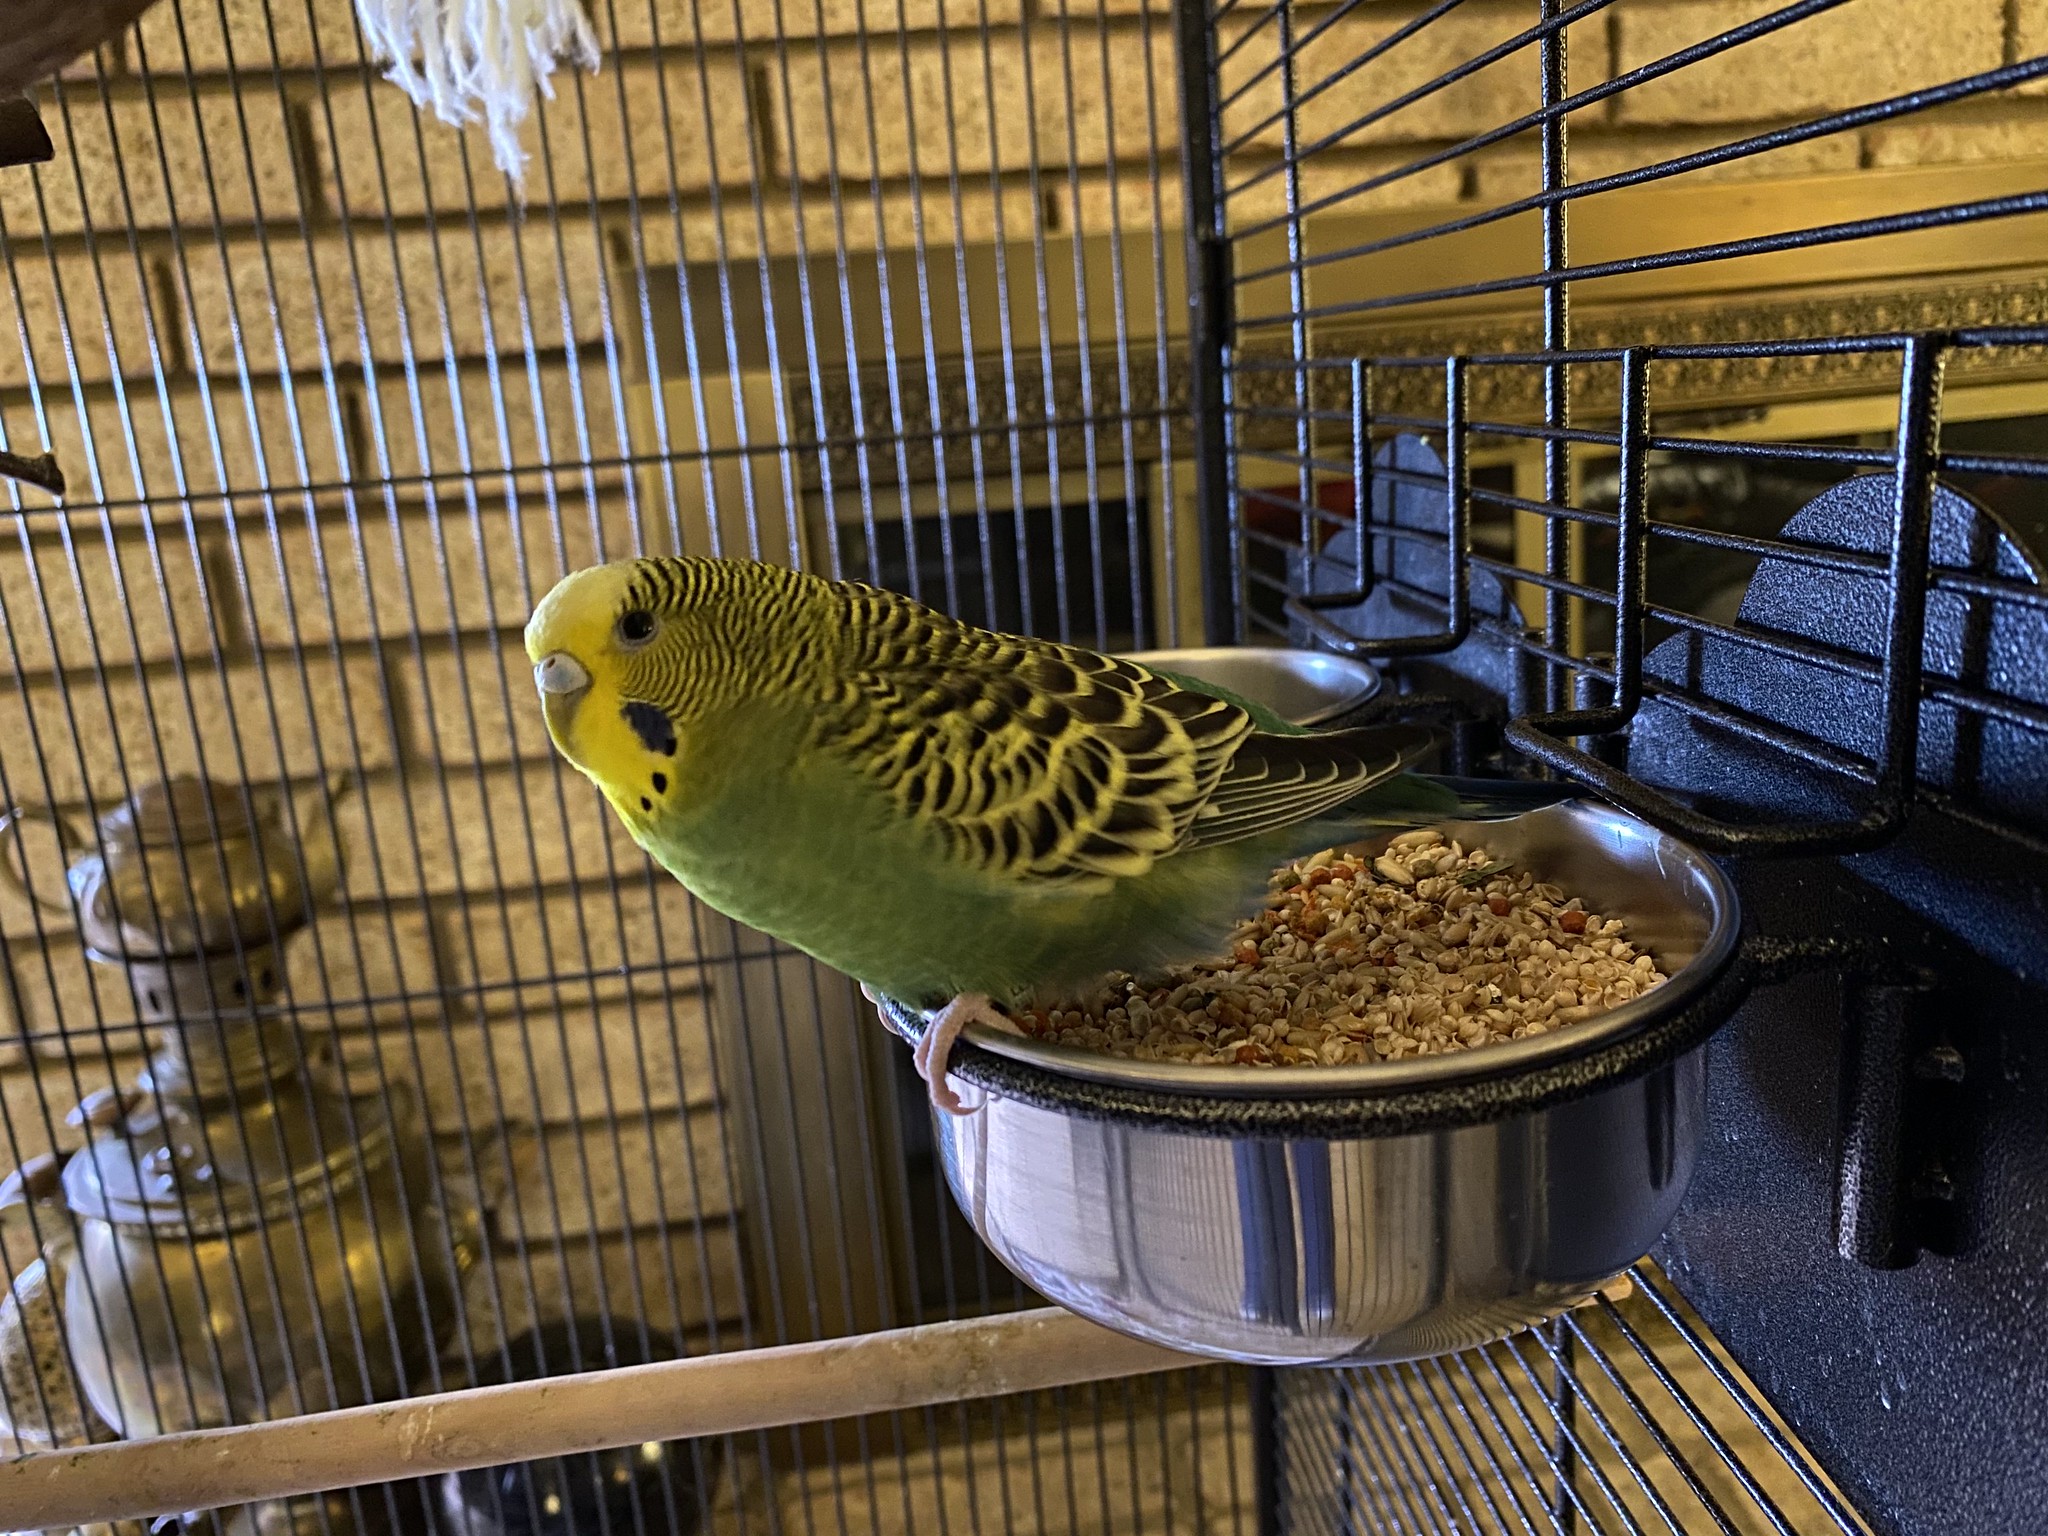 Hey internet, this is Fiji the ‘Keet  and he wants you to know, this seed is his!